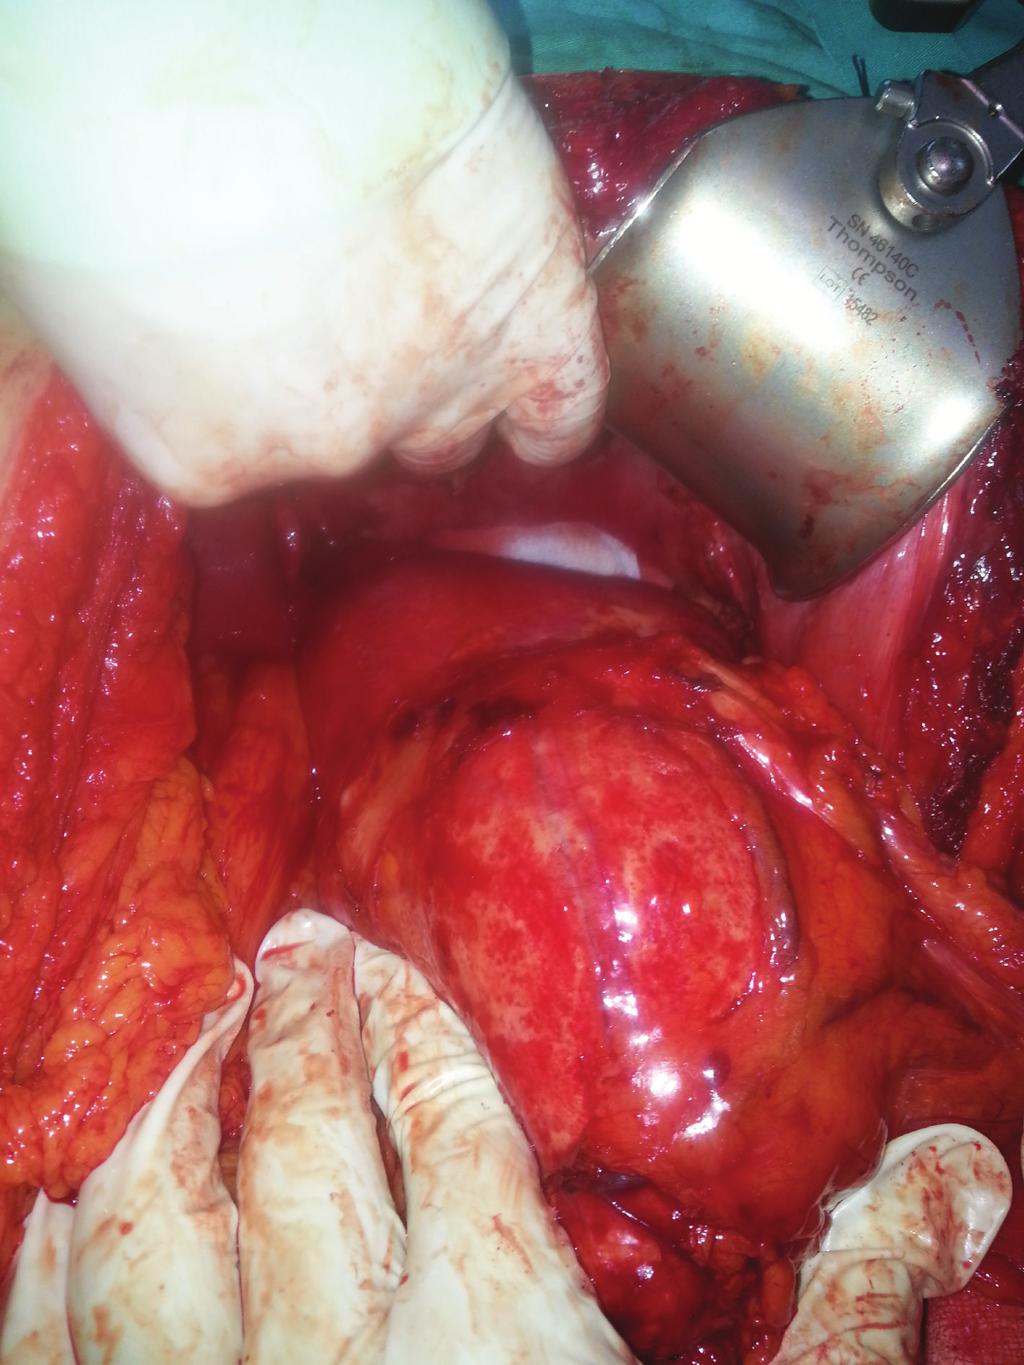 Case Reports in Surgery Figure 2: A large cystic mass that is attached to the left liver lobe (yellow arrow shows the left liver lobe and blue arrow shows the cystic mass).